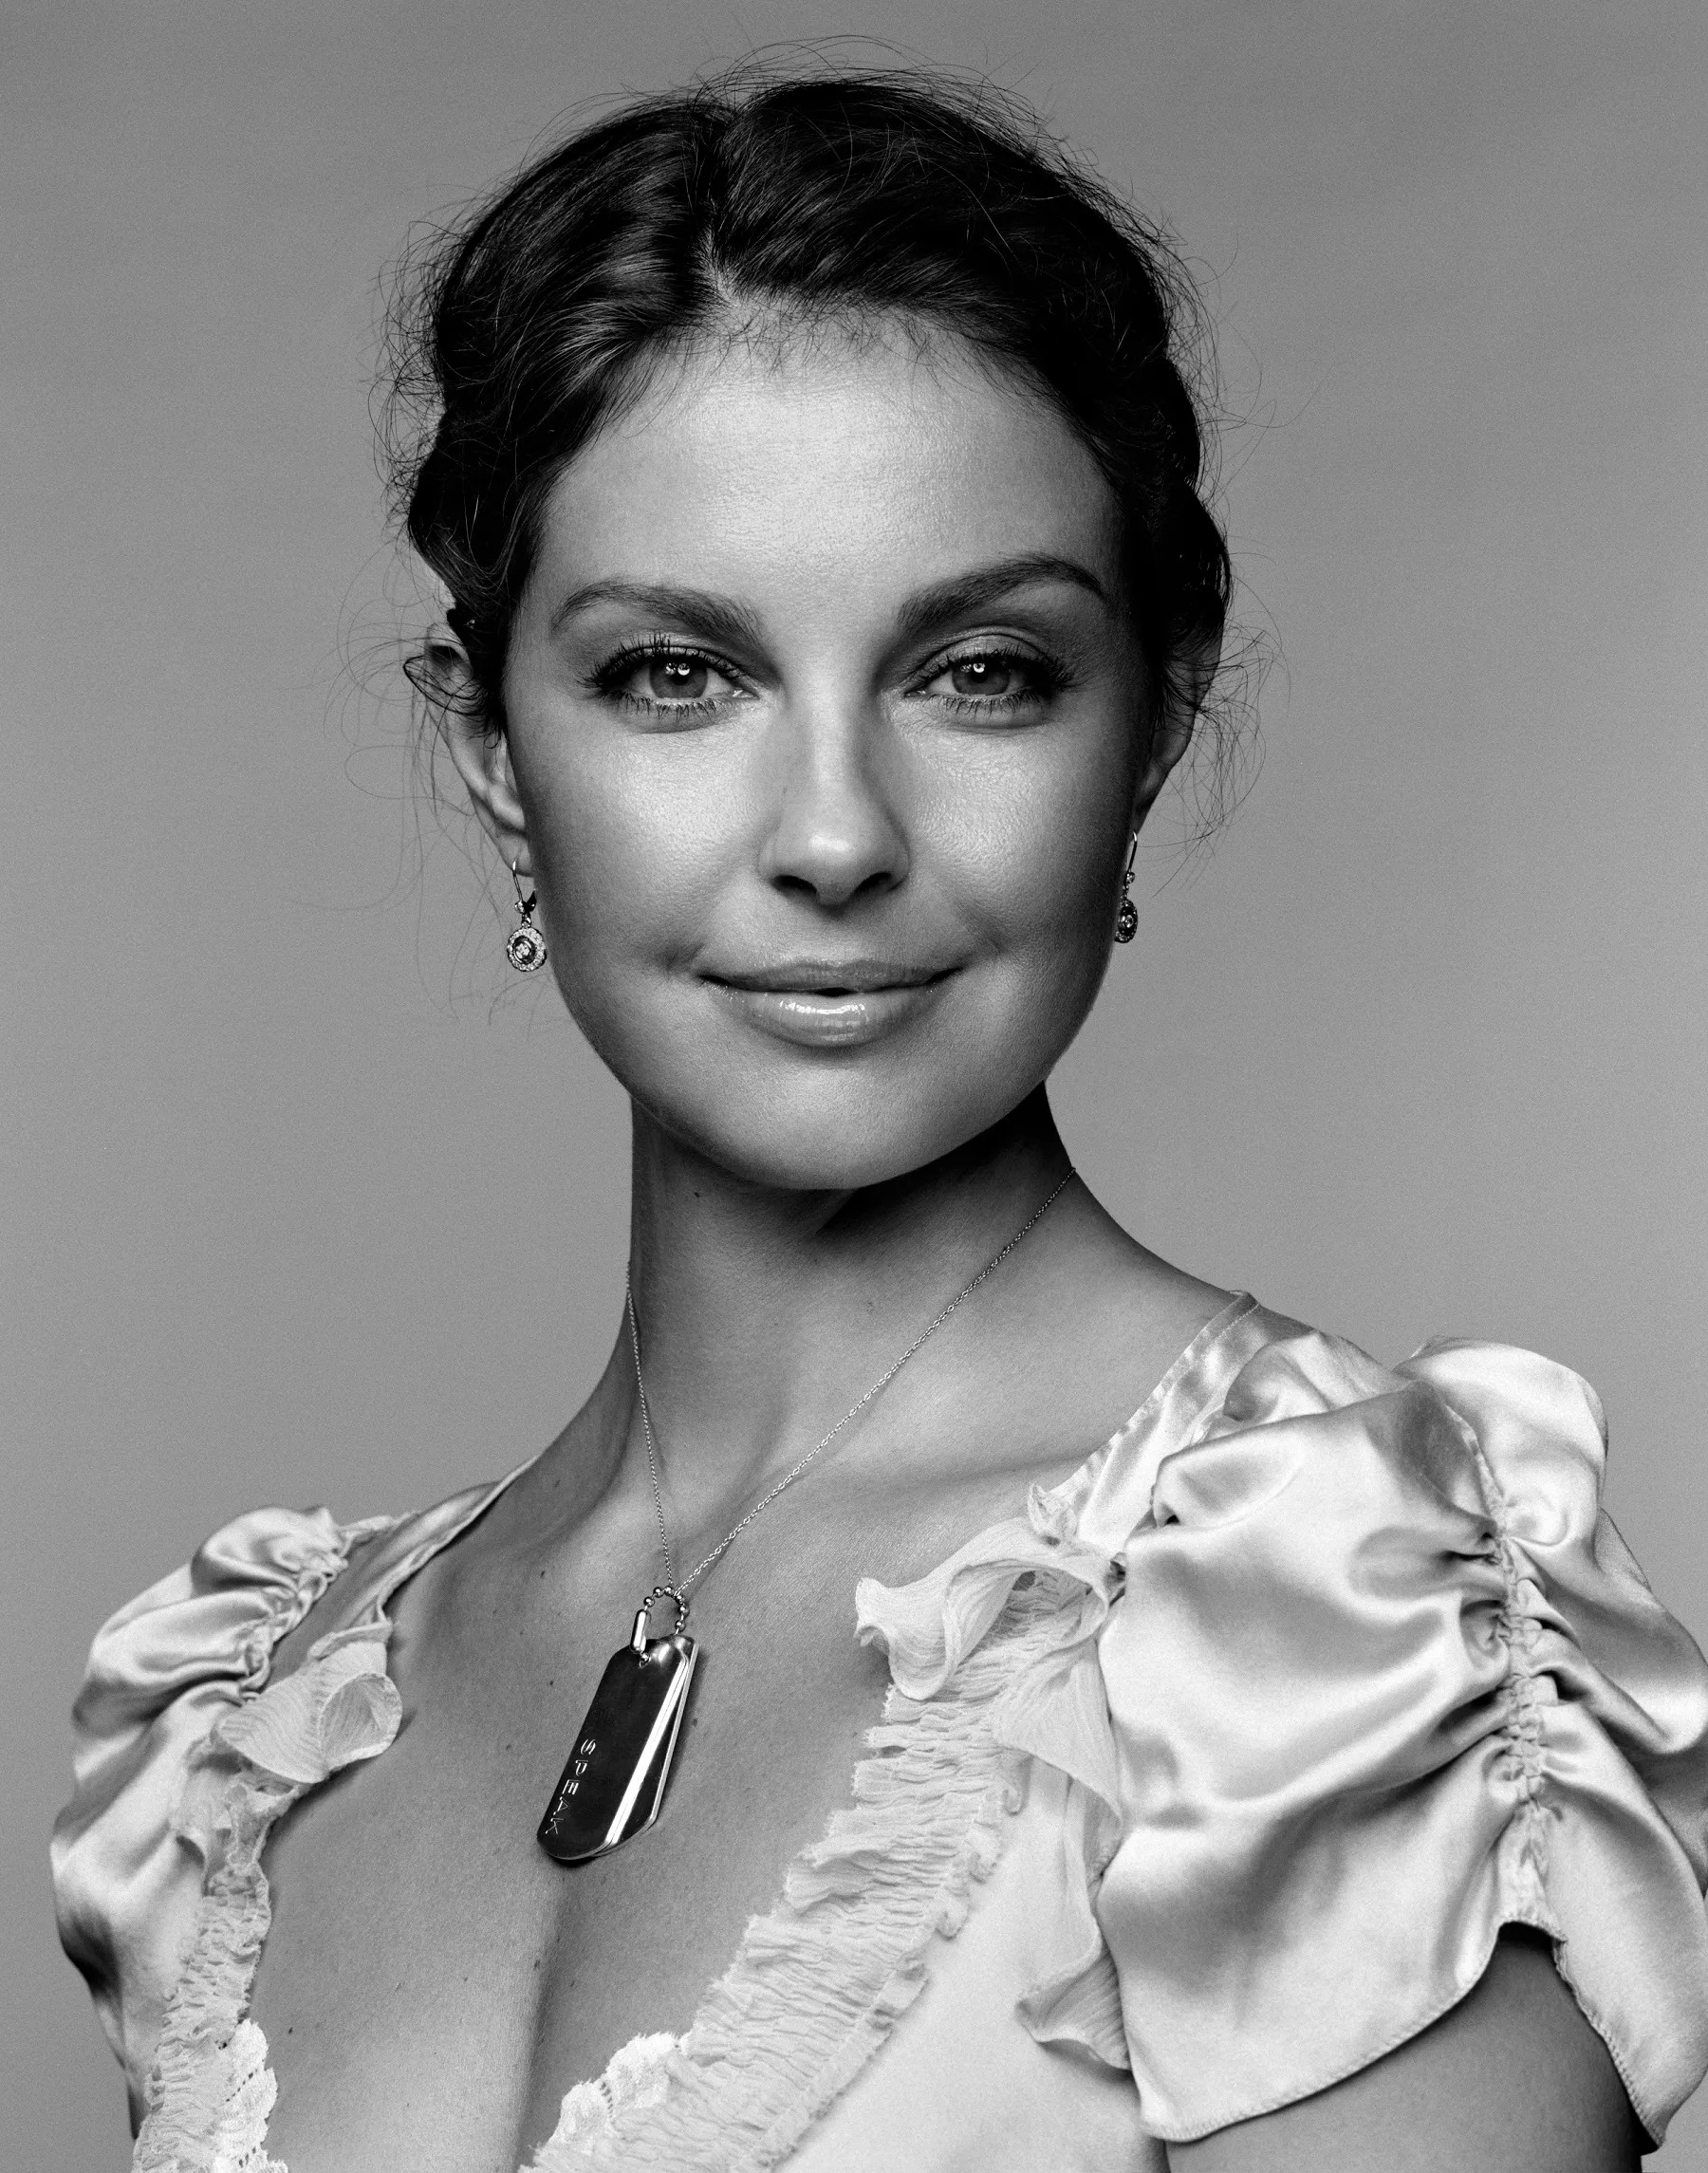 A headshot of Ashley Judd wearing a dress and a dog tag necklace